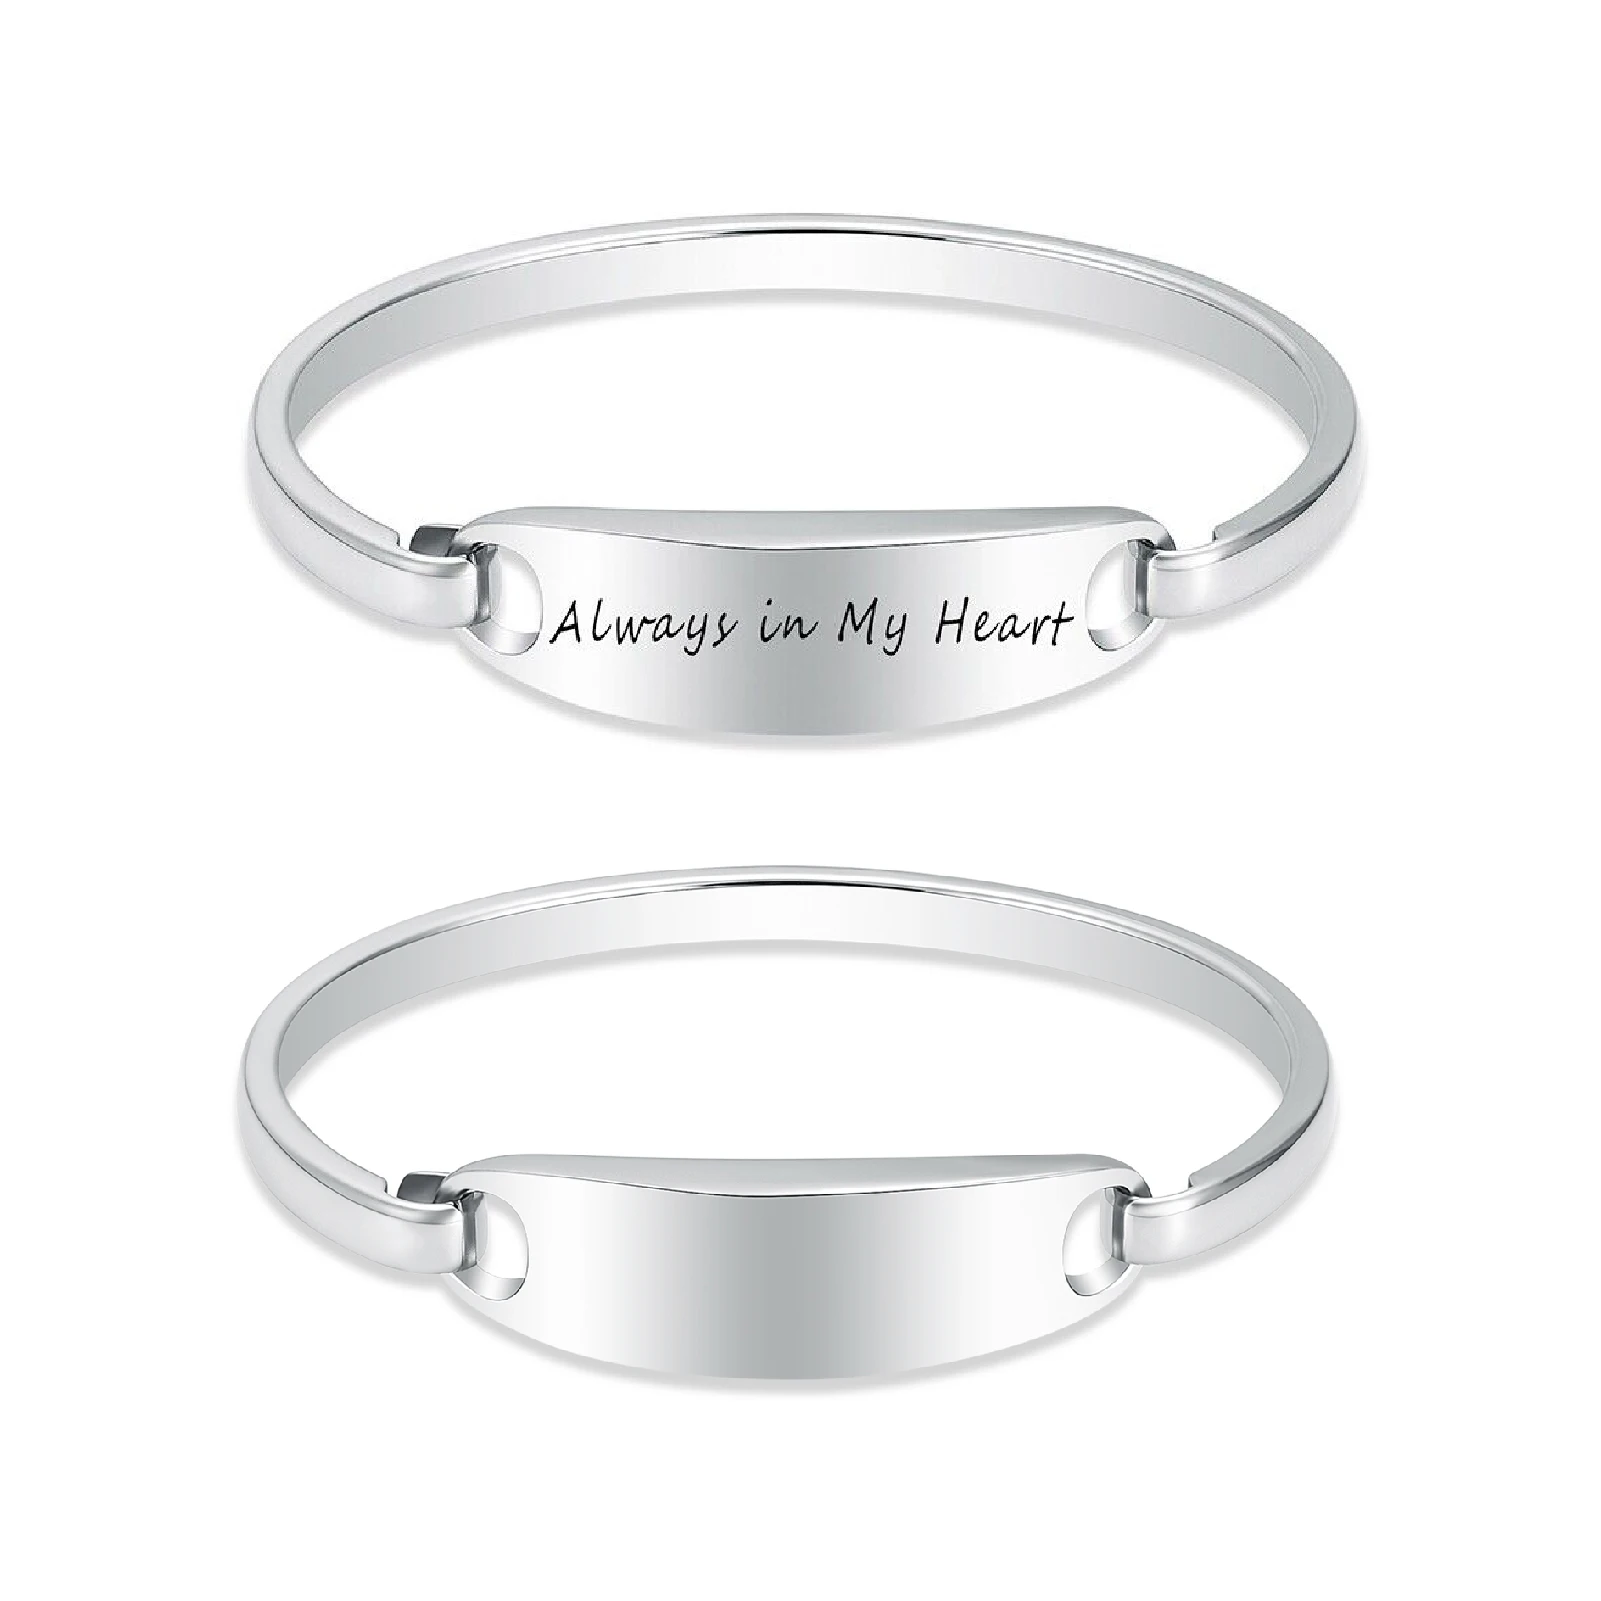 

Stainless Steel Cremation Urn Bracelet For Pet/Human Ashes Memorial Bangle Customized "Always in My Heart" Women's Keepsake